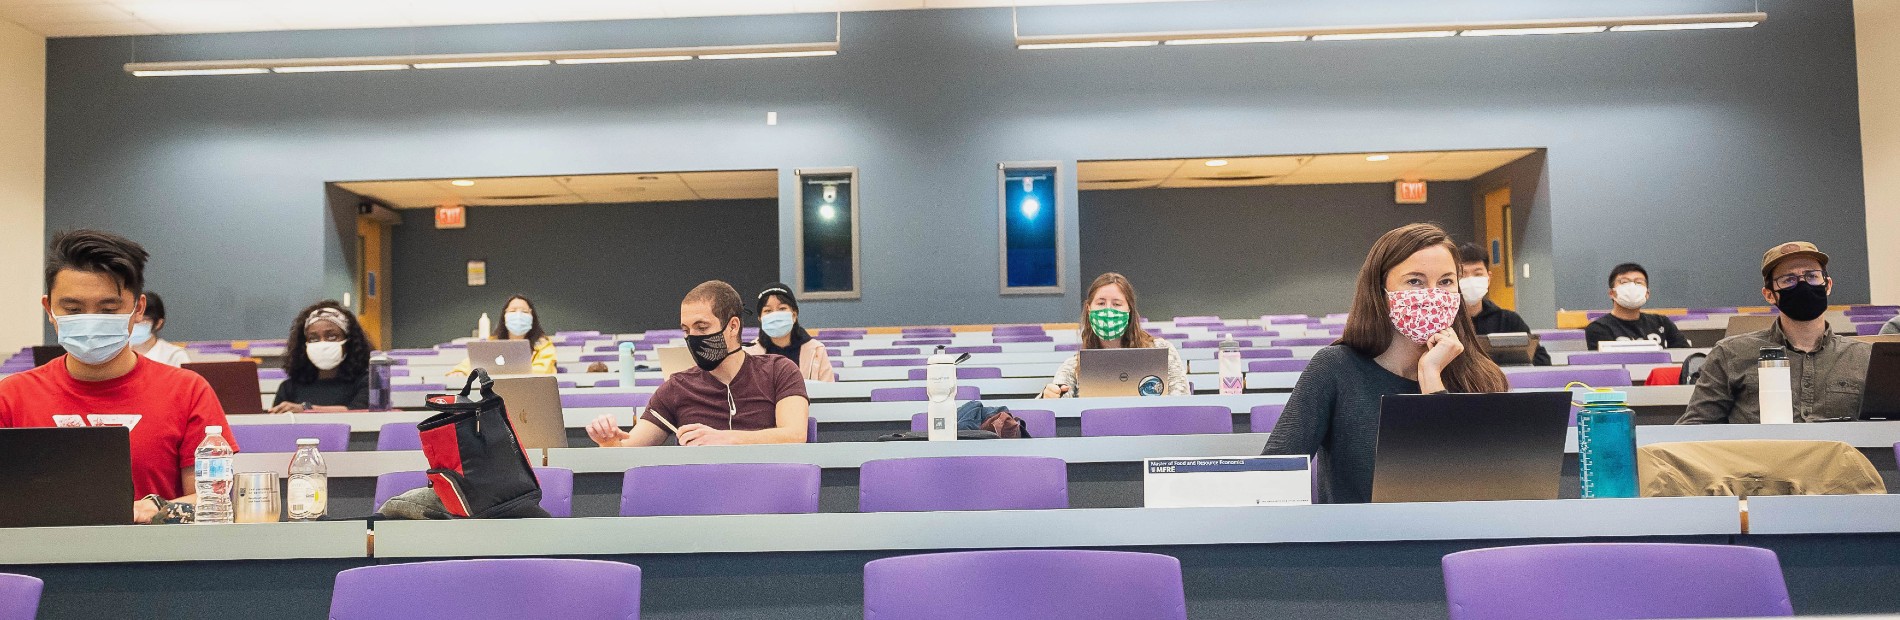 UBC students in a lecture hall wearing masks